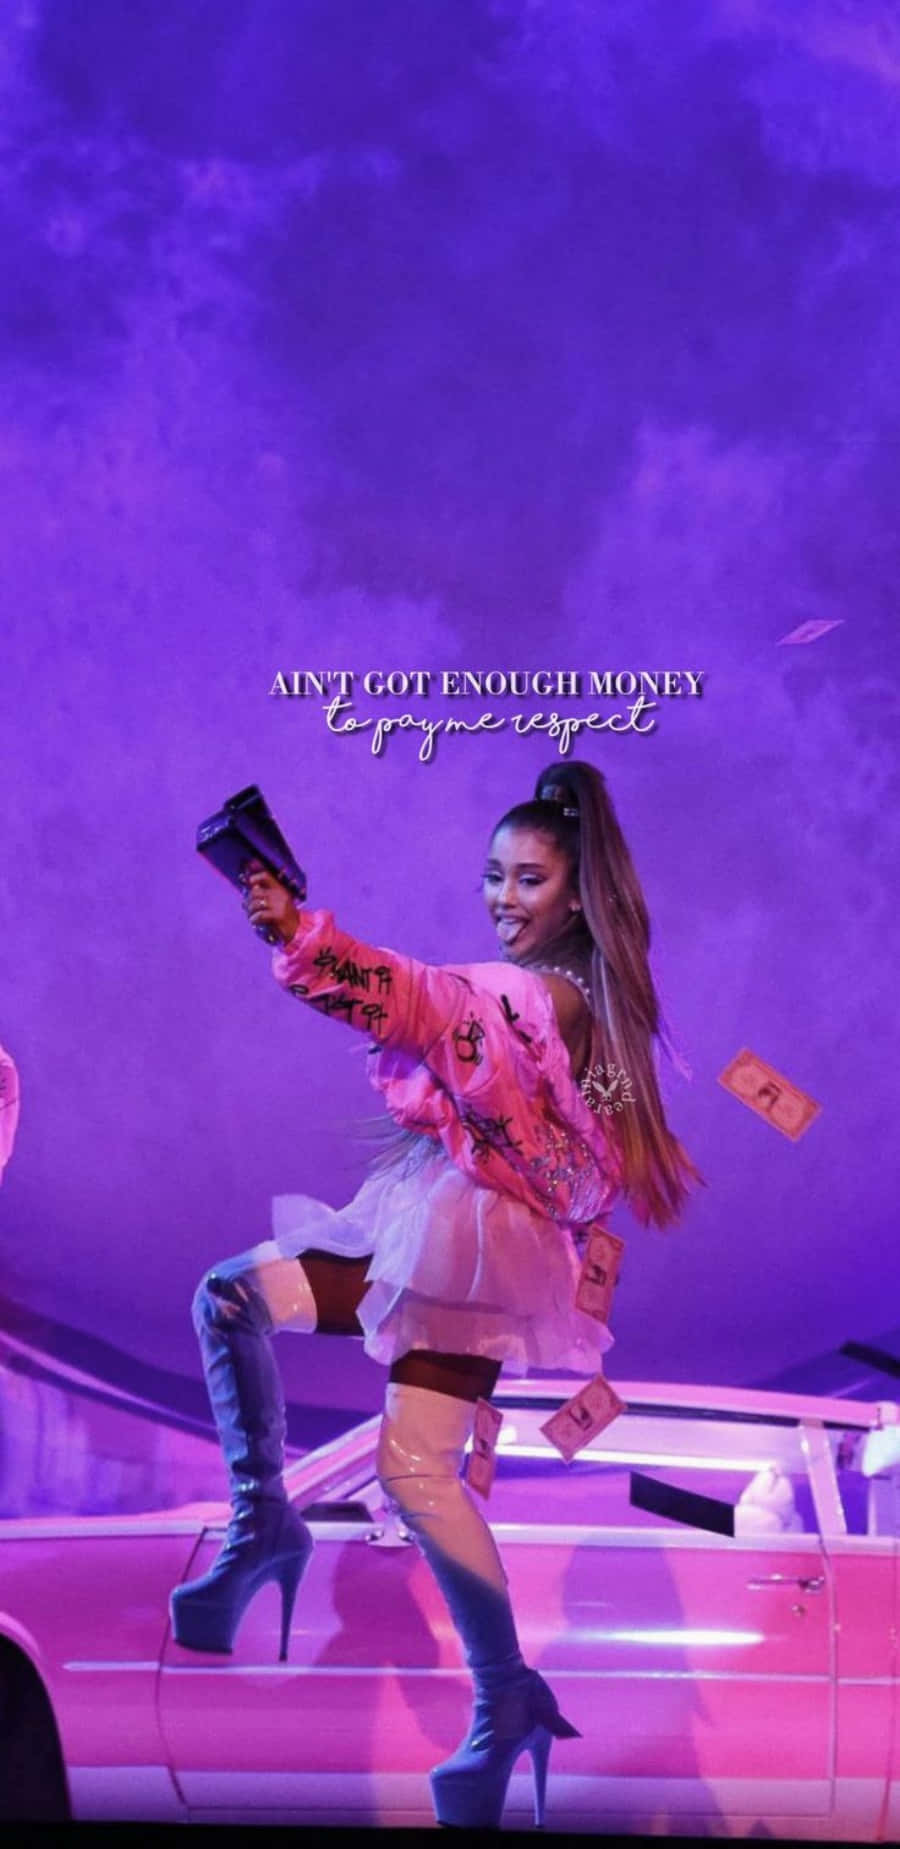 Ariana Grande - Without Music - 7 Rings - YouTube